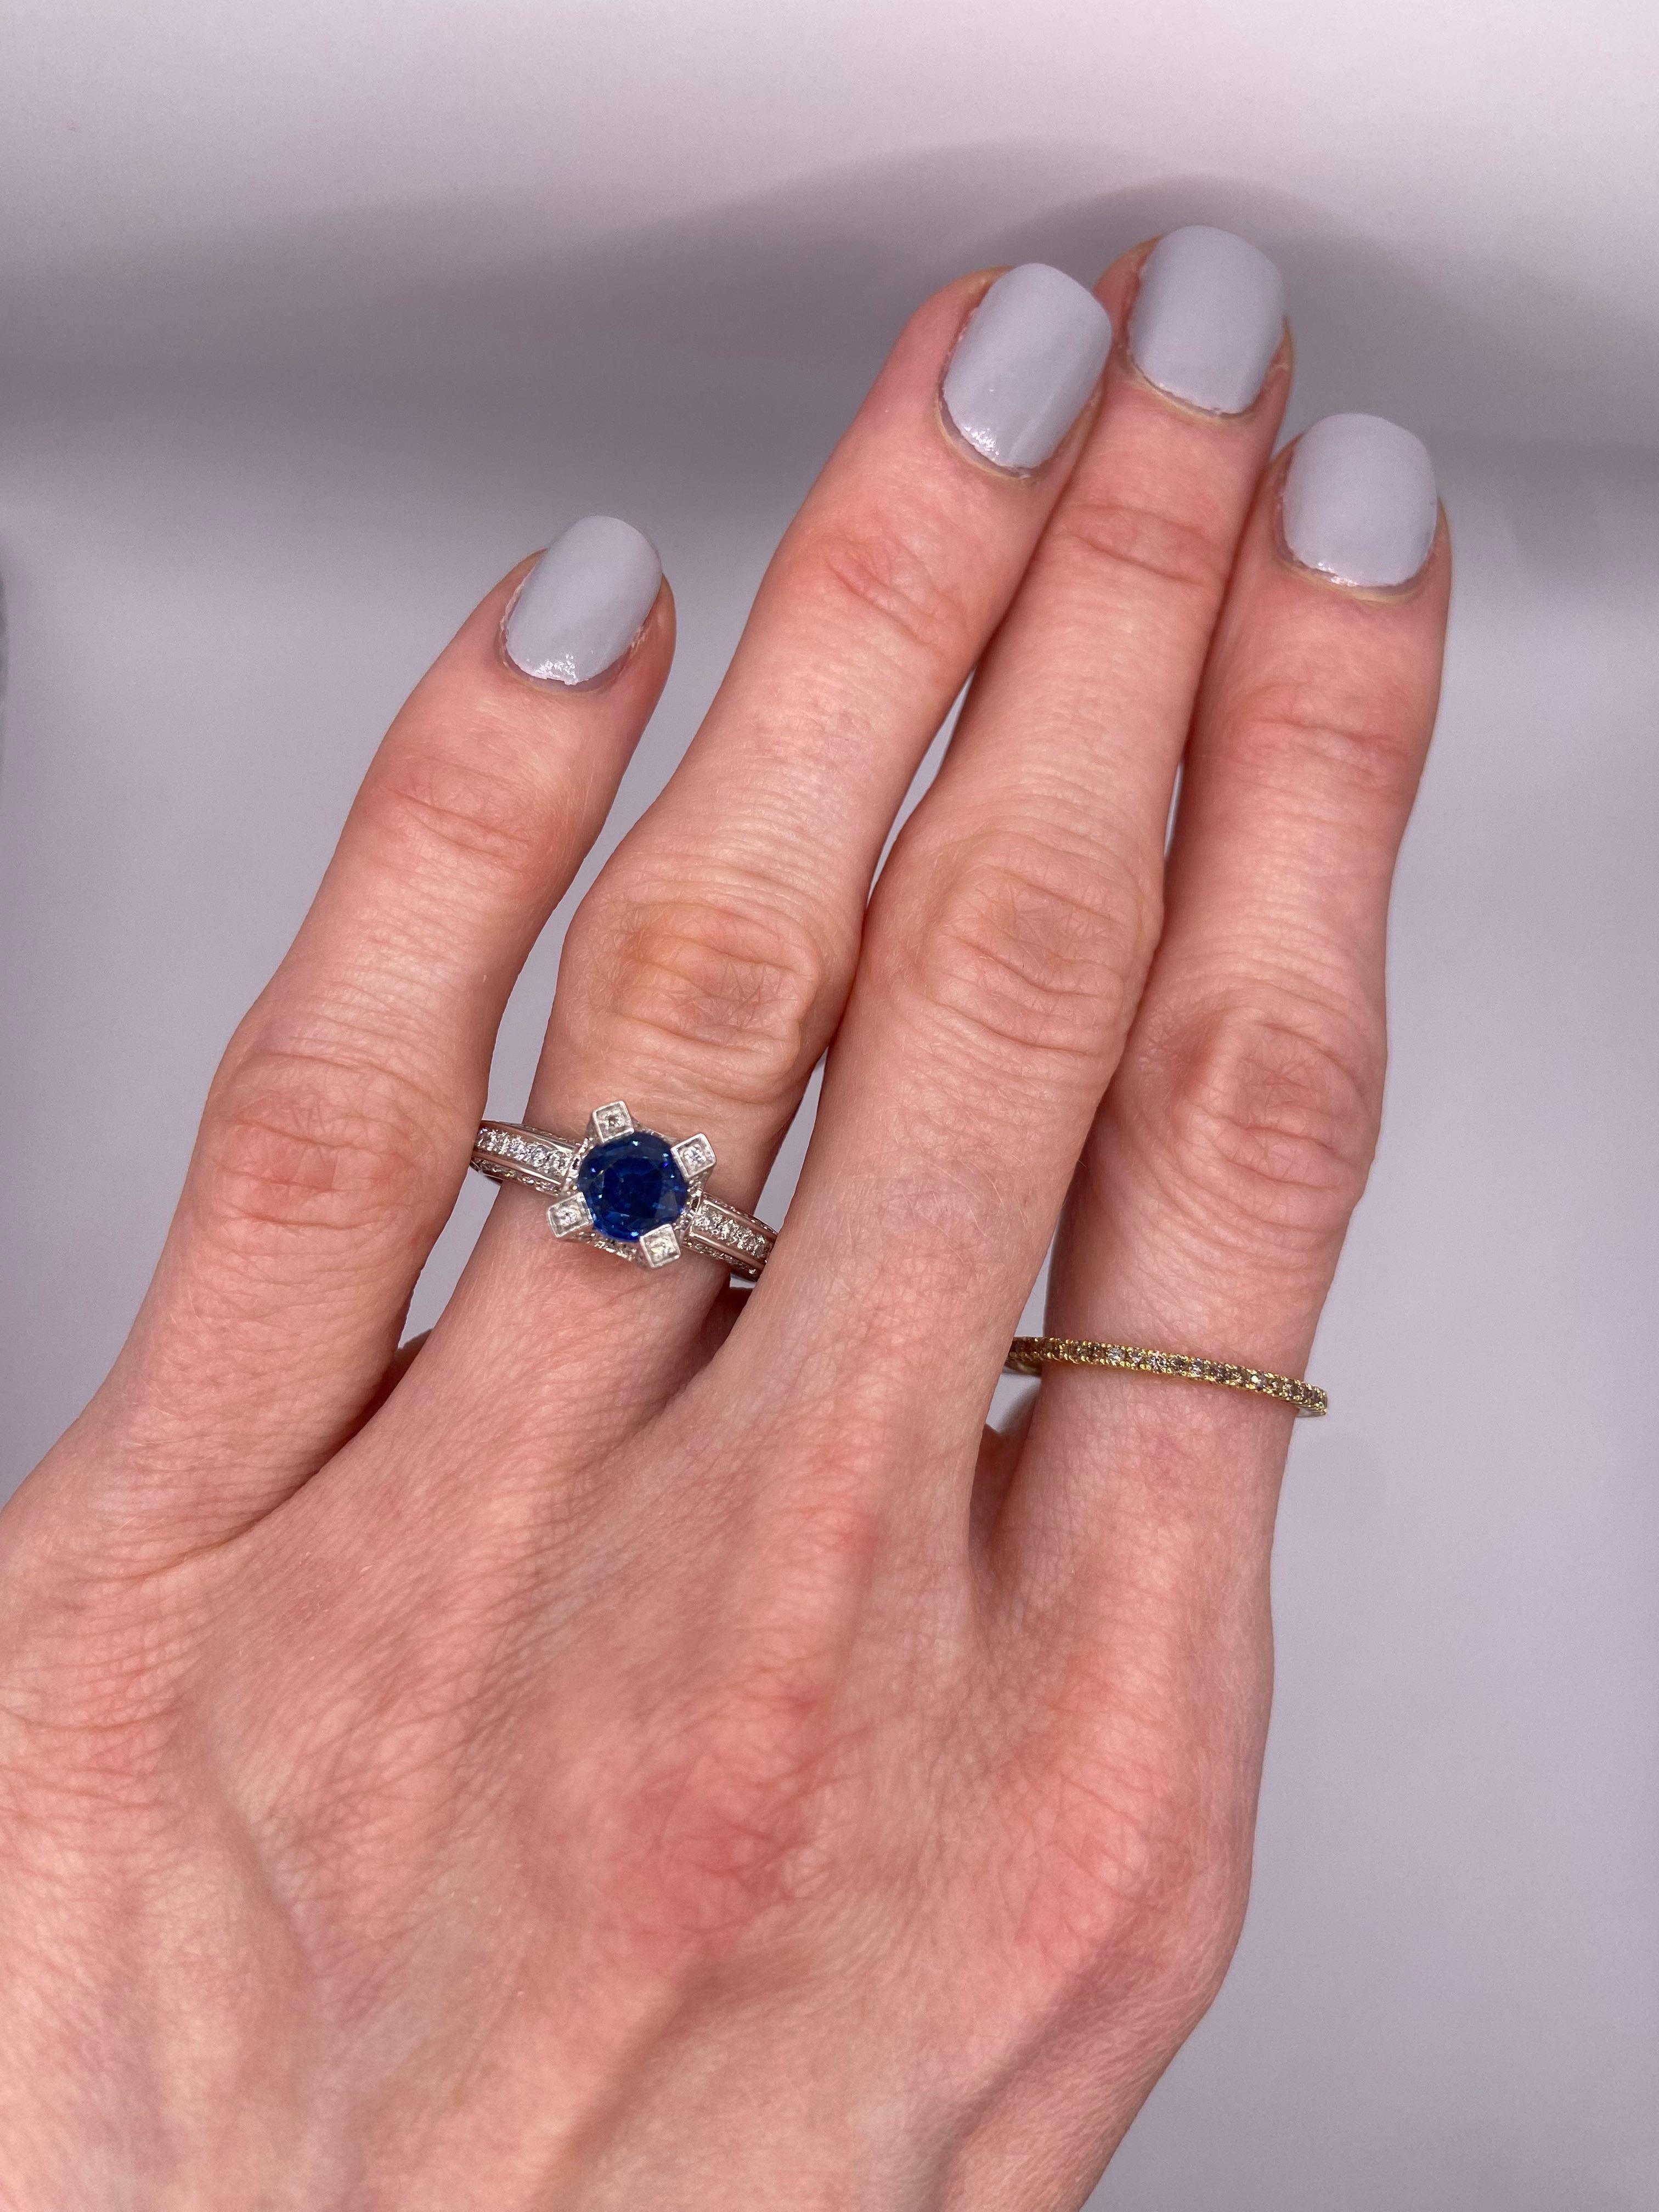 Metal: 14KT White Gold
Size: 6.75
(Ring is size 6.75, but is sizable upon request)

Number of Round Sapphires: 1
Carat Weight: 1.11ctw
Stone Size: 5.9mm

Number of Round Diamonds: 96
Carat Weight: 0.56ctw